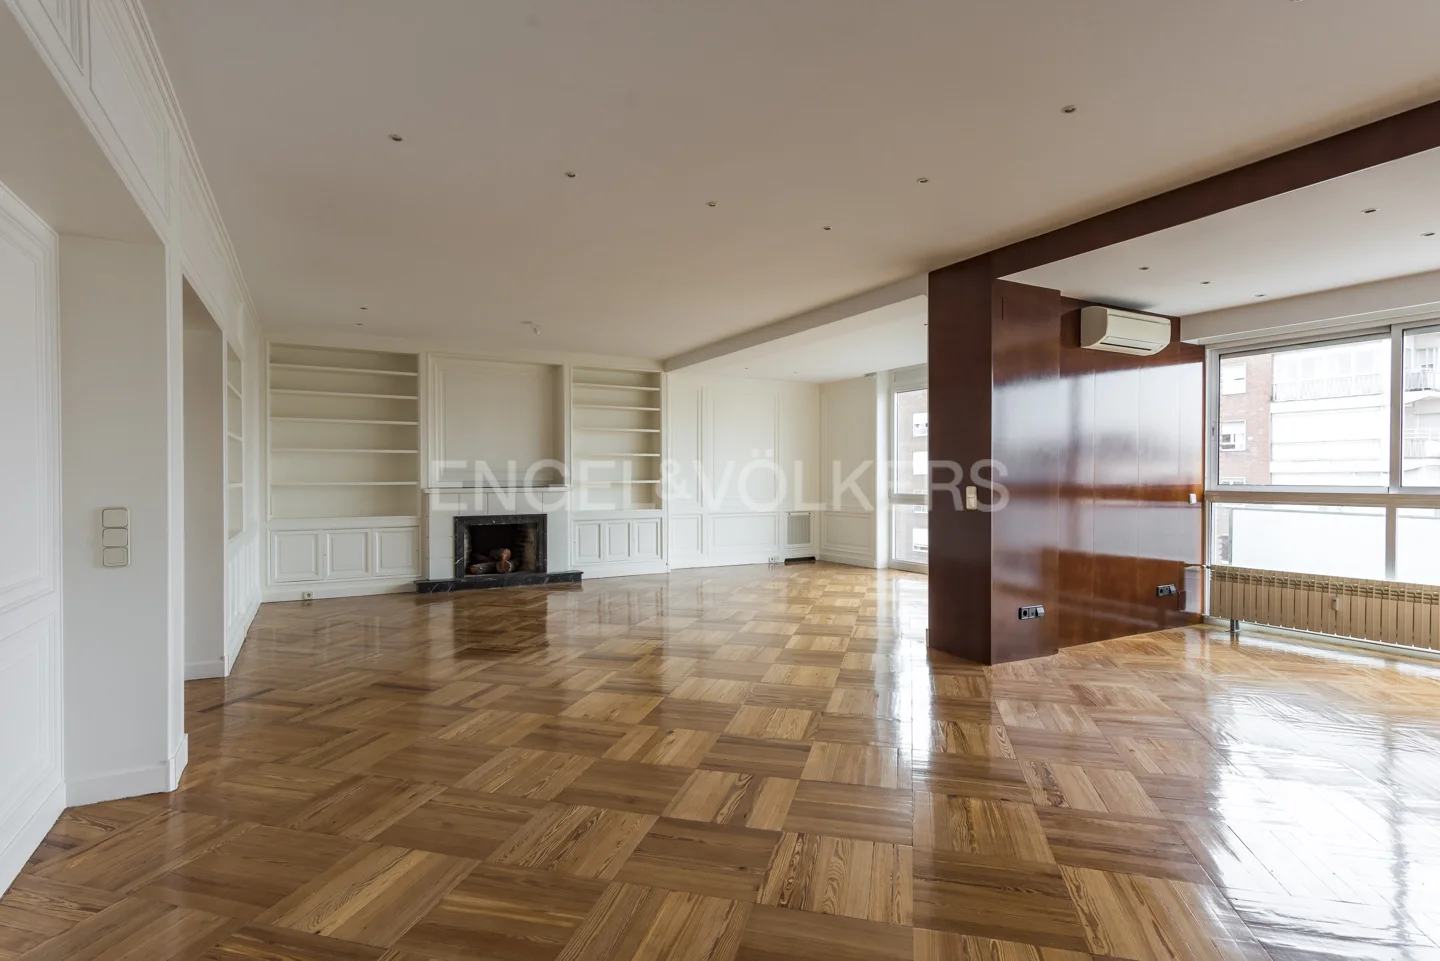 Luxury flat for rent in Chamartín